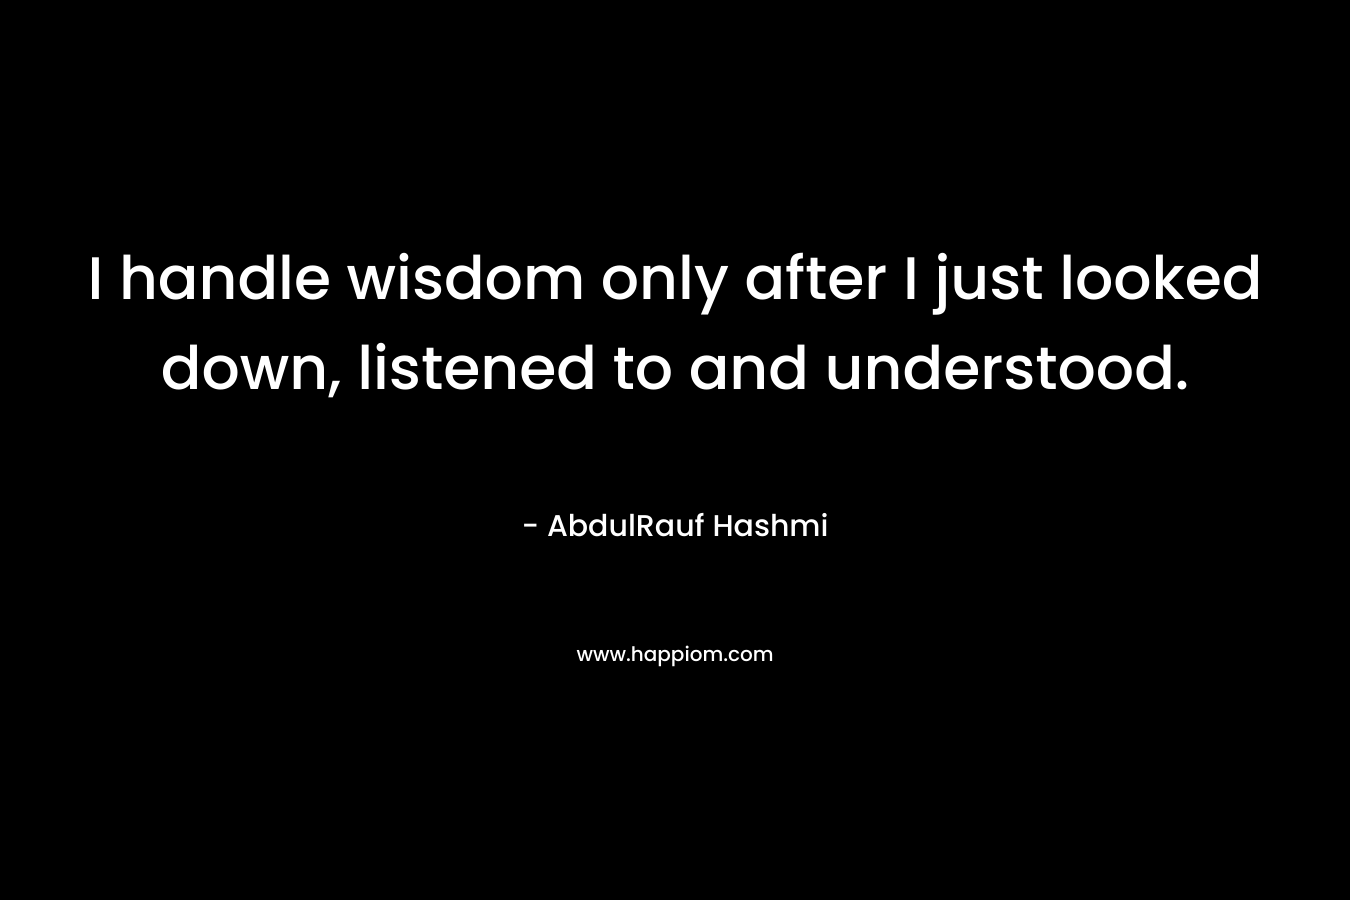 I handle wisdom only after I just looked down, listened to and understood.